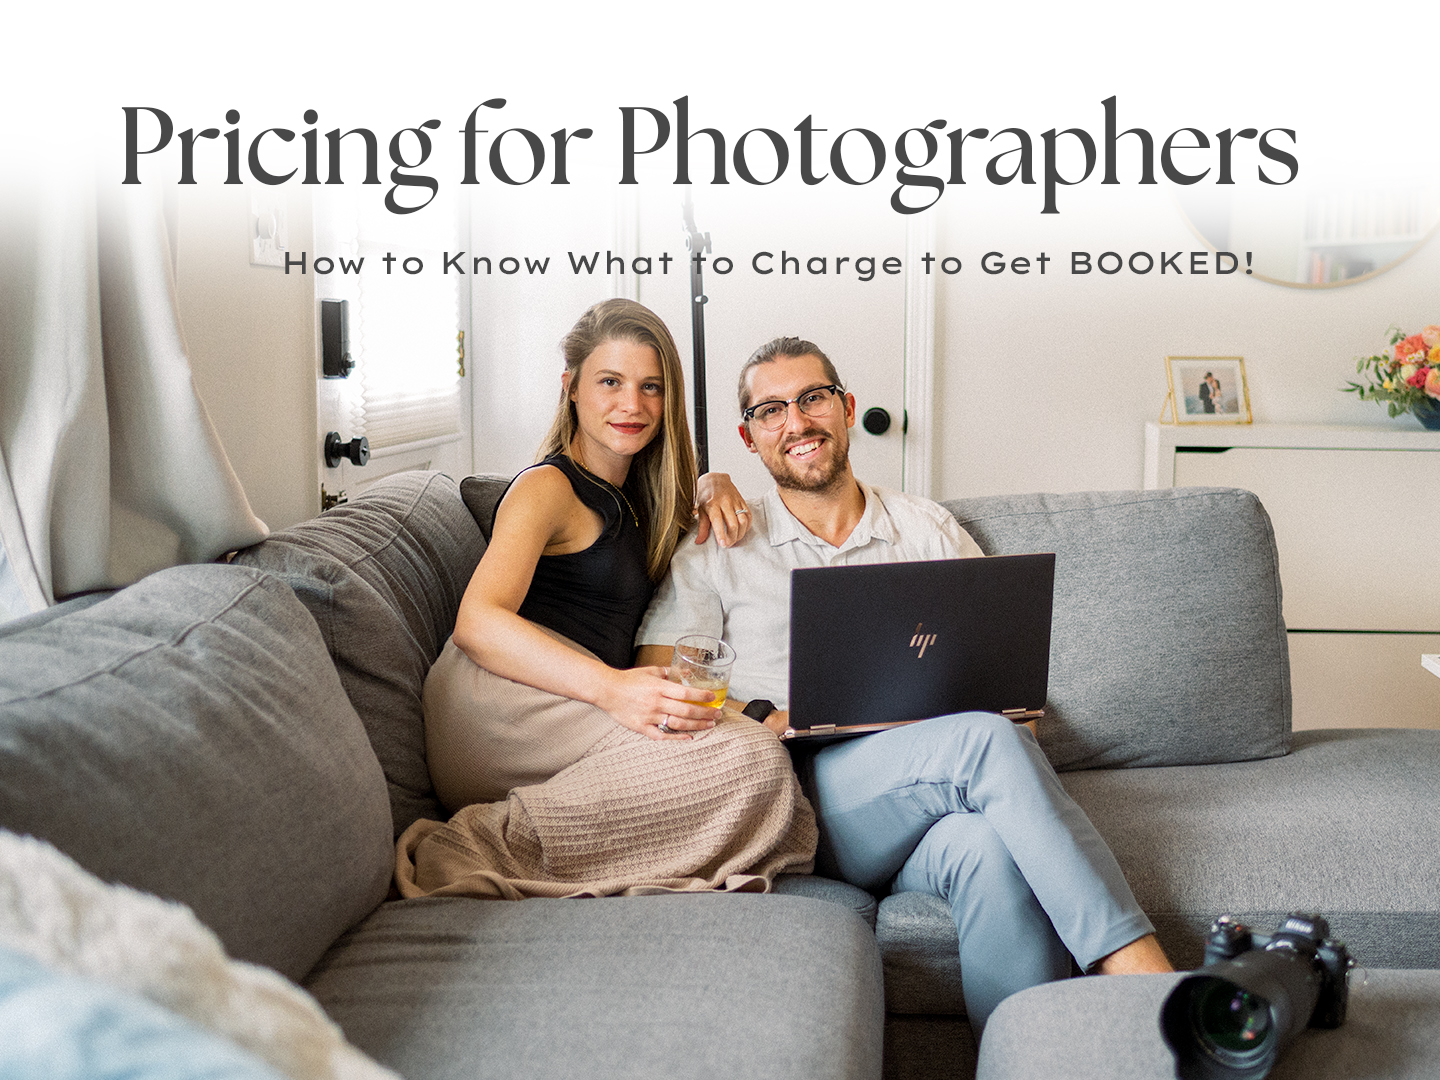 Two Photography Educators Sit on a Couch Discussing their Photography Pricing Workshop